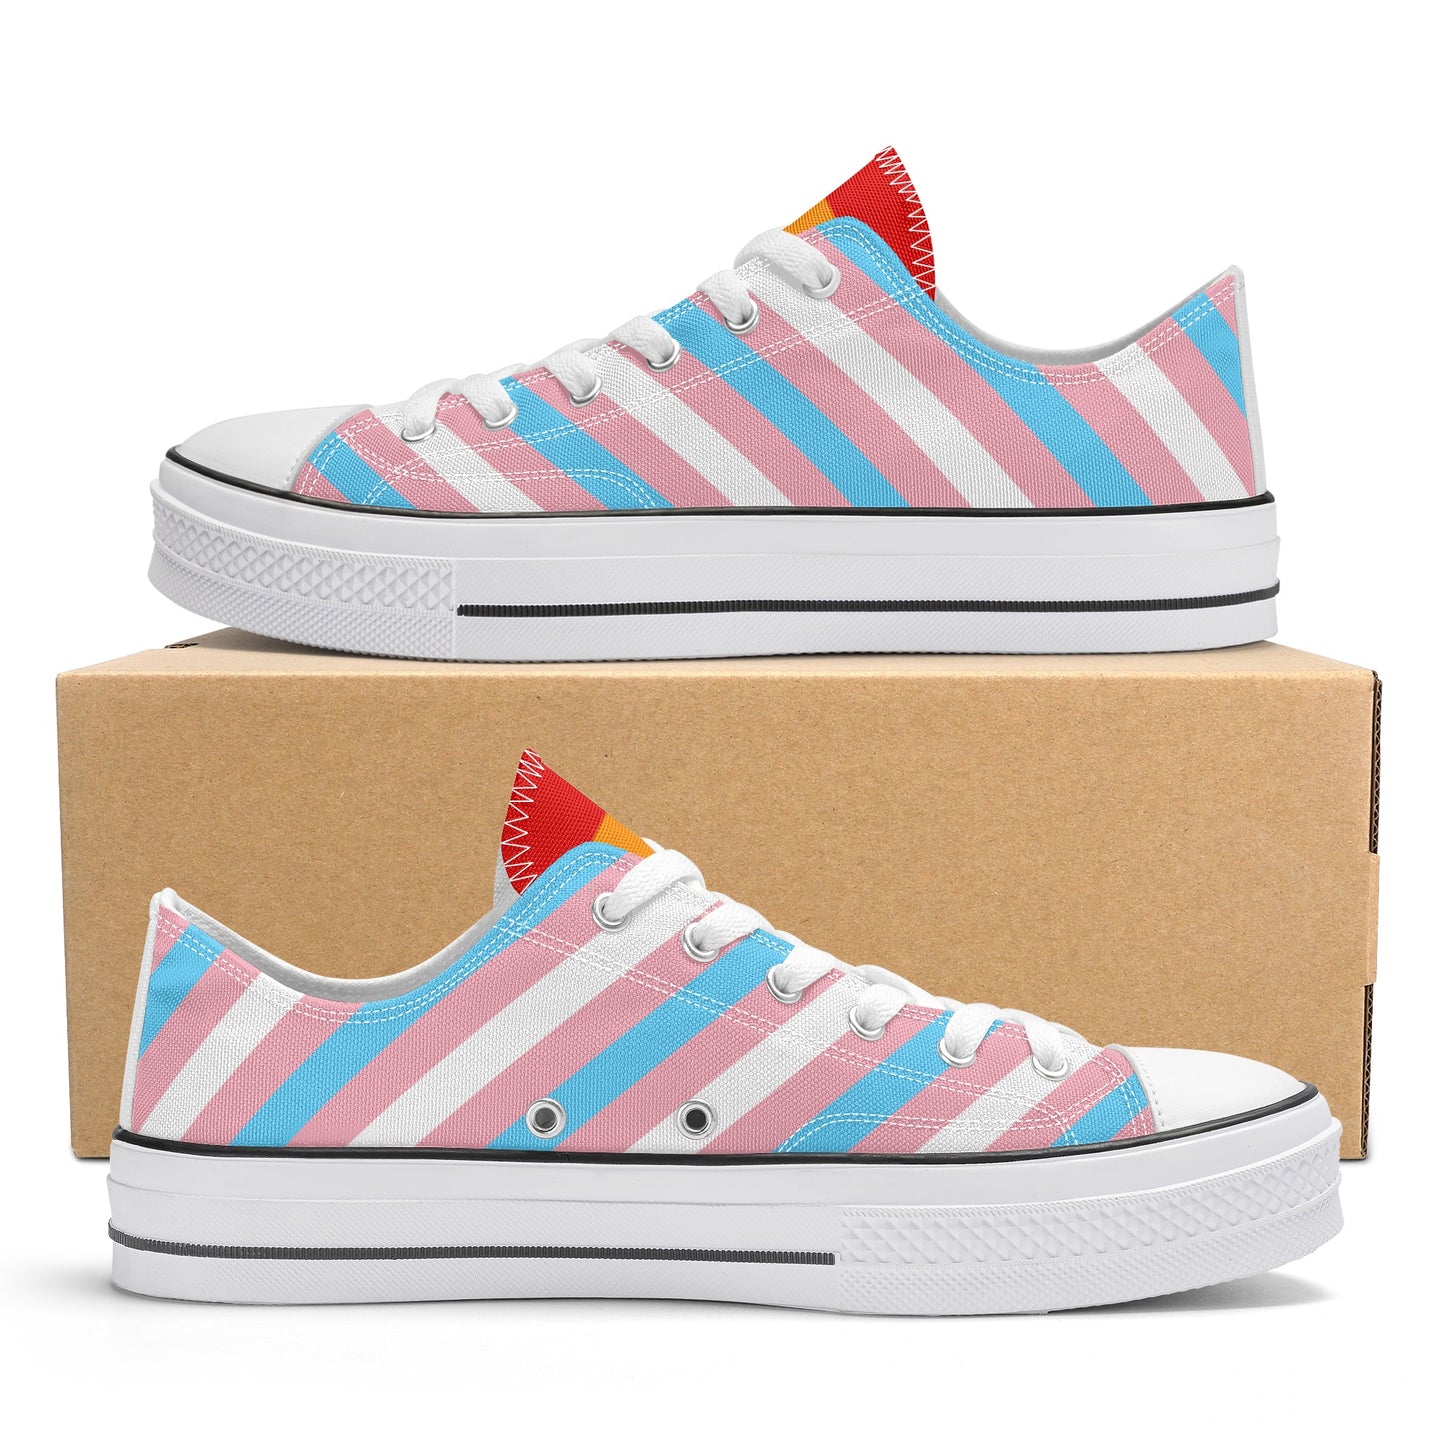 Transgender Pride Collection - Mens Classic Low Top Canvas Shoes for the LGBTQIA+ community